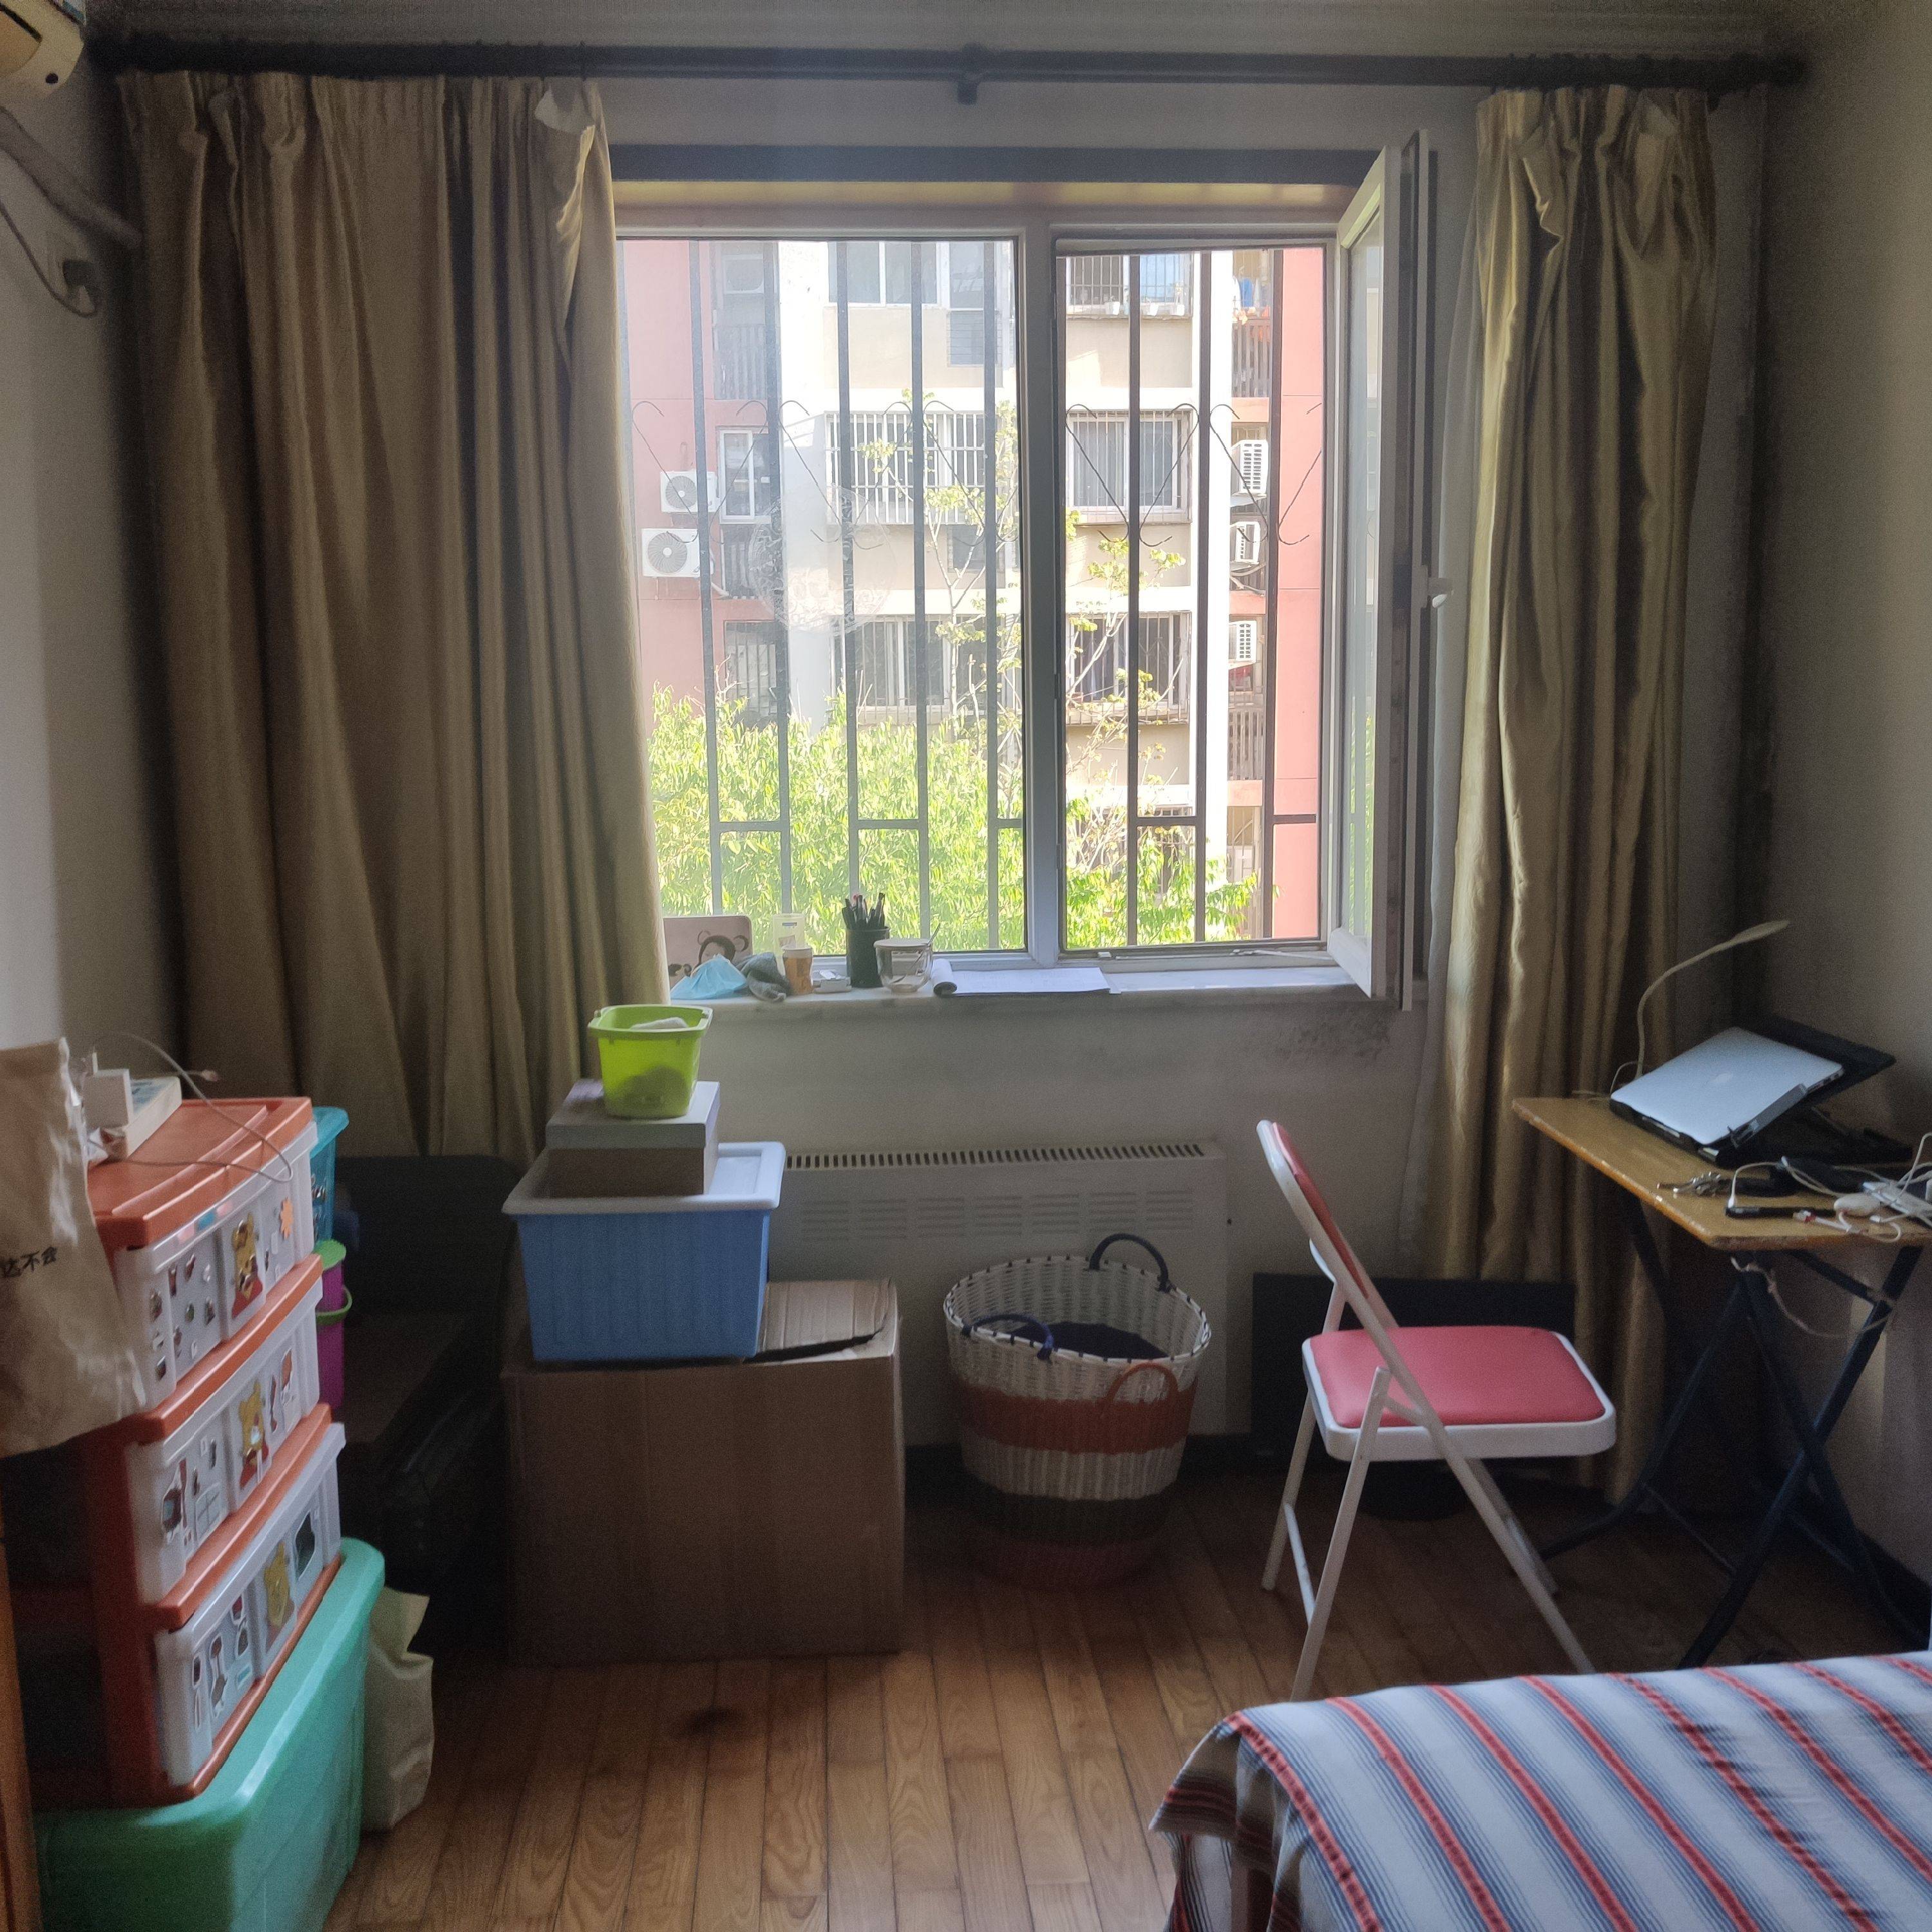 Beijing-Changping-Cozy Home,Clean&Comfy,No Gender Limit,Chilled,LGBTQ Friendly,Pet Friendly